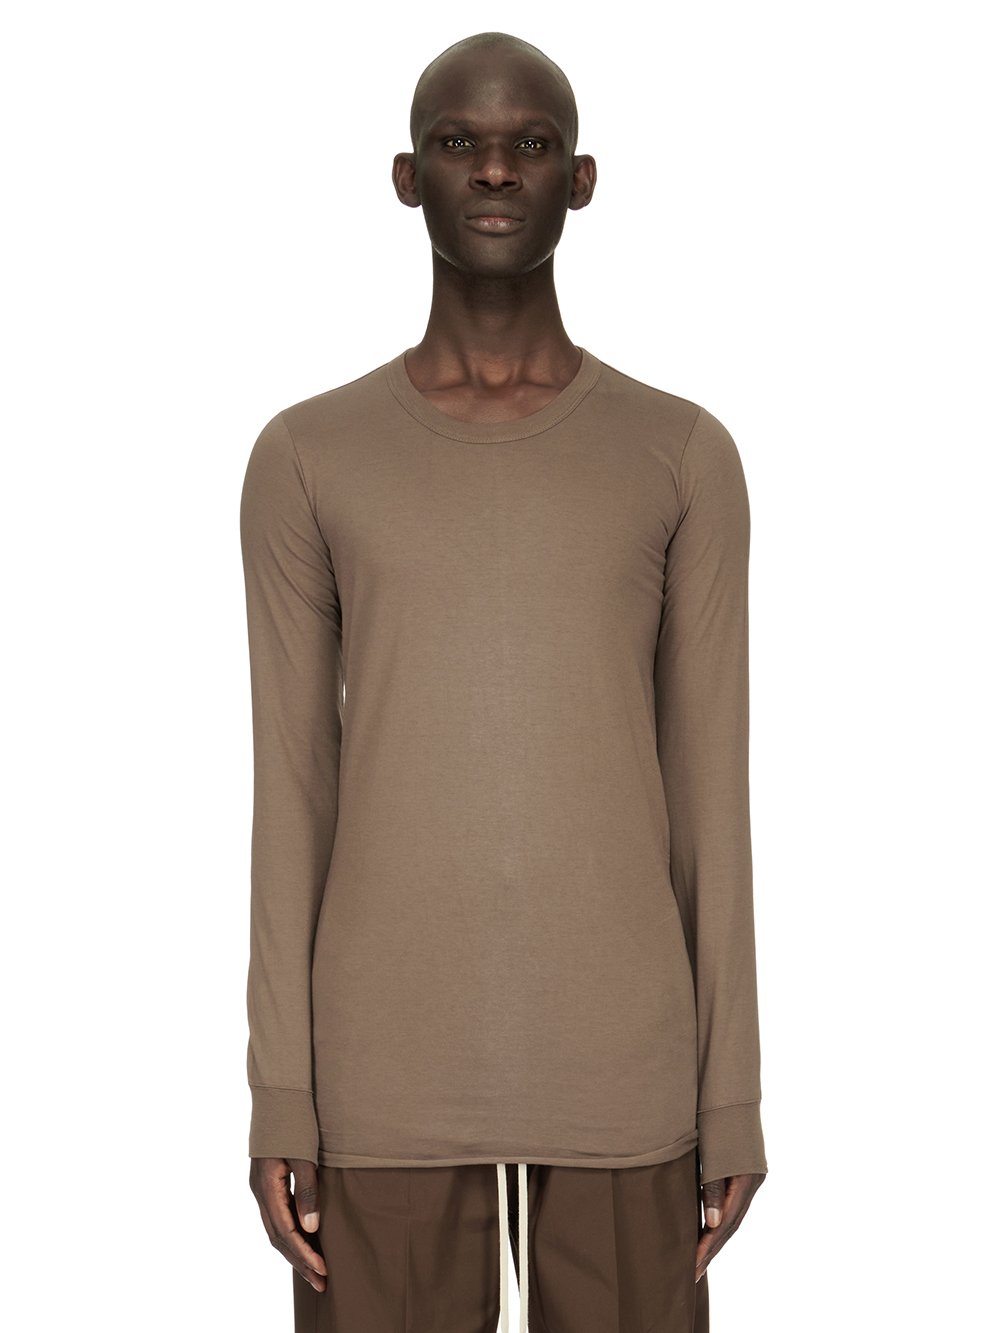 RICK OWENS FW23 LUXOR BASIC LS T IN DUST GREY CLASSIC COTTON JERSEY